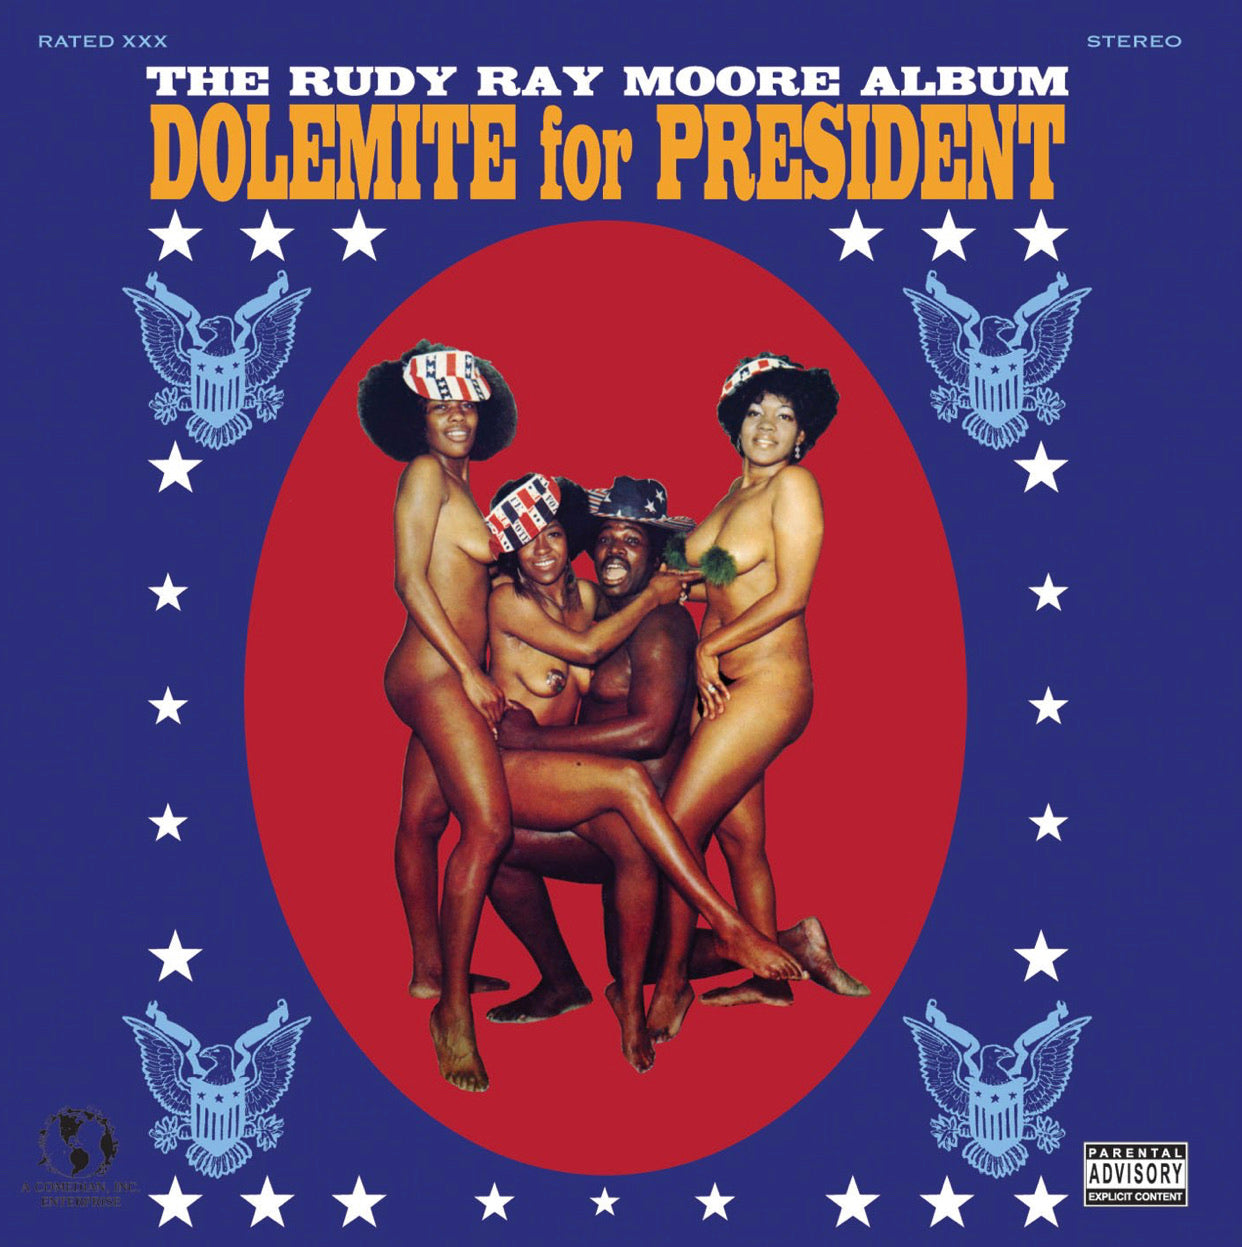 RUDY RAY MOORE - "Dolemite For President” LP